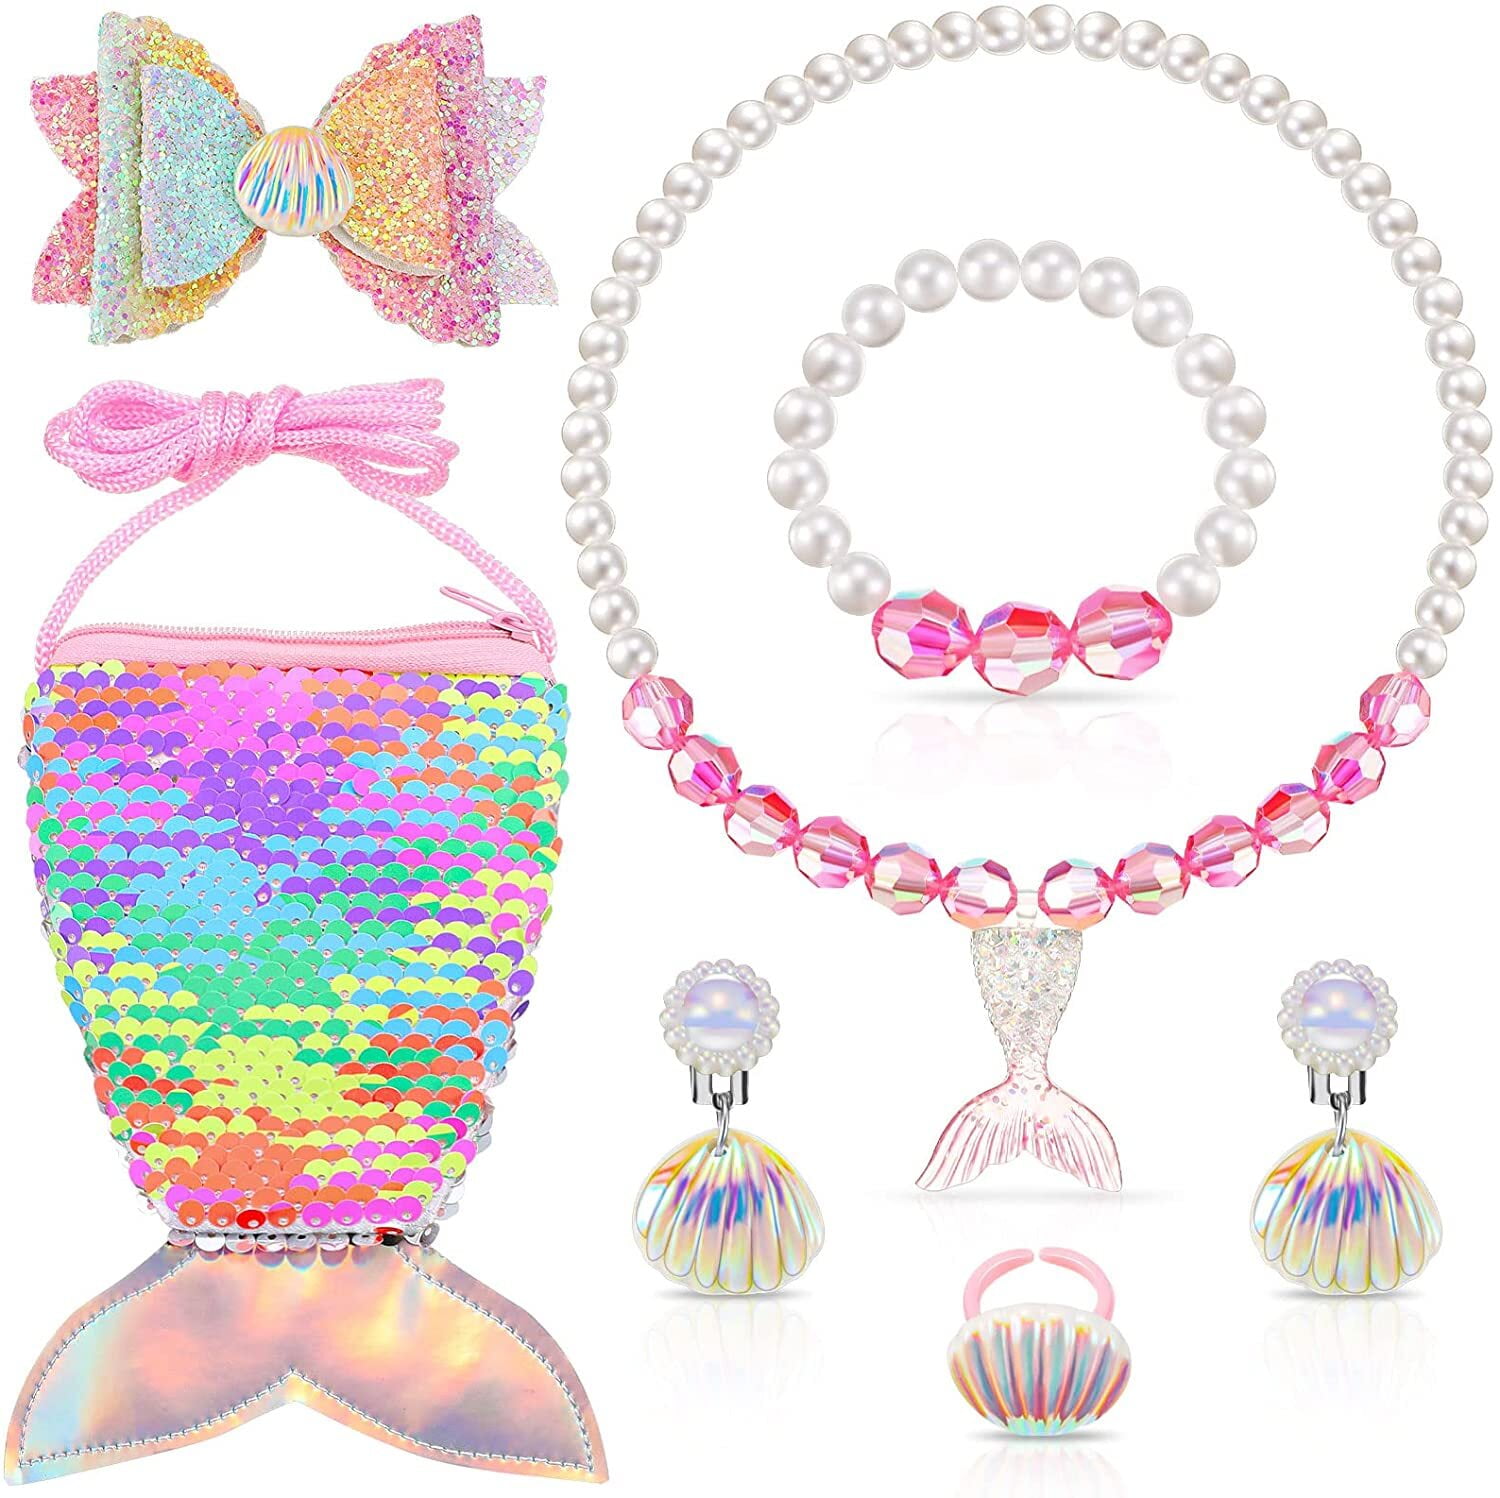 Nuolux 5 in 1 Children Girl Jewelry Set Mermaid Shape Simulation Pearl Children Necklace Bracelet Ring Earring for Toddler Dress Up Jewelry Party